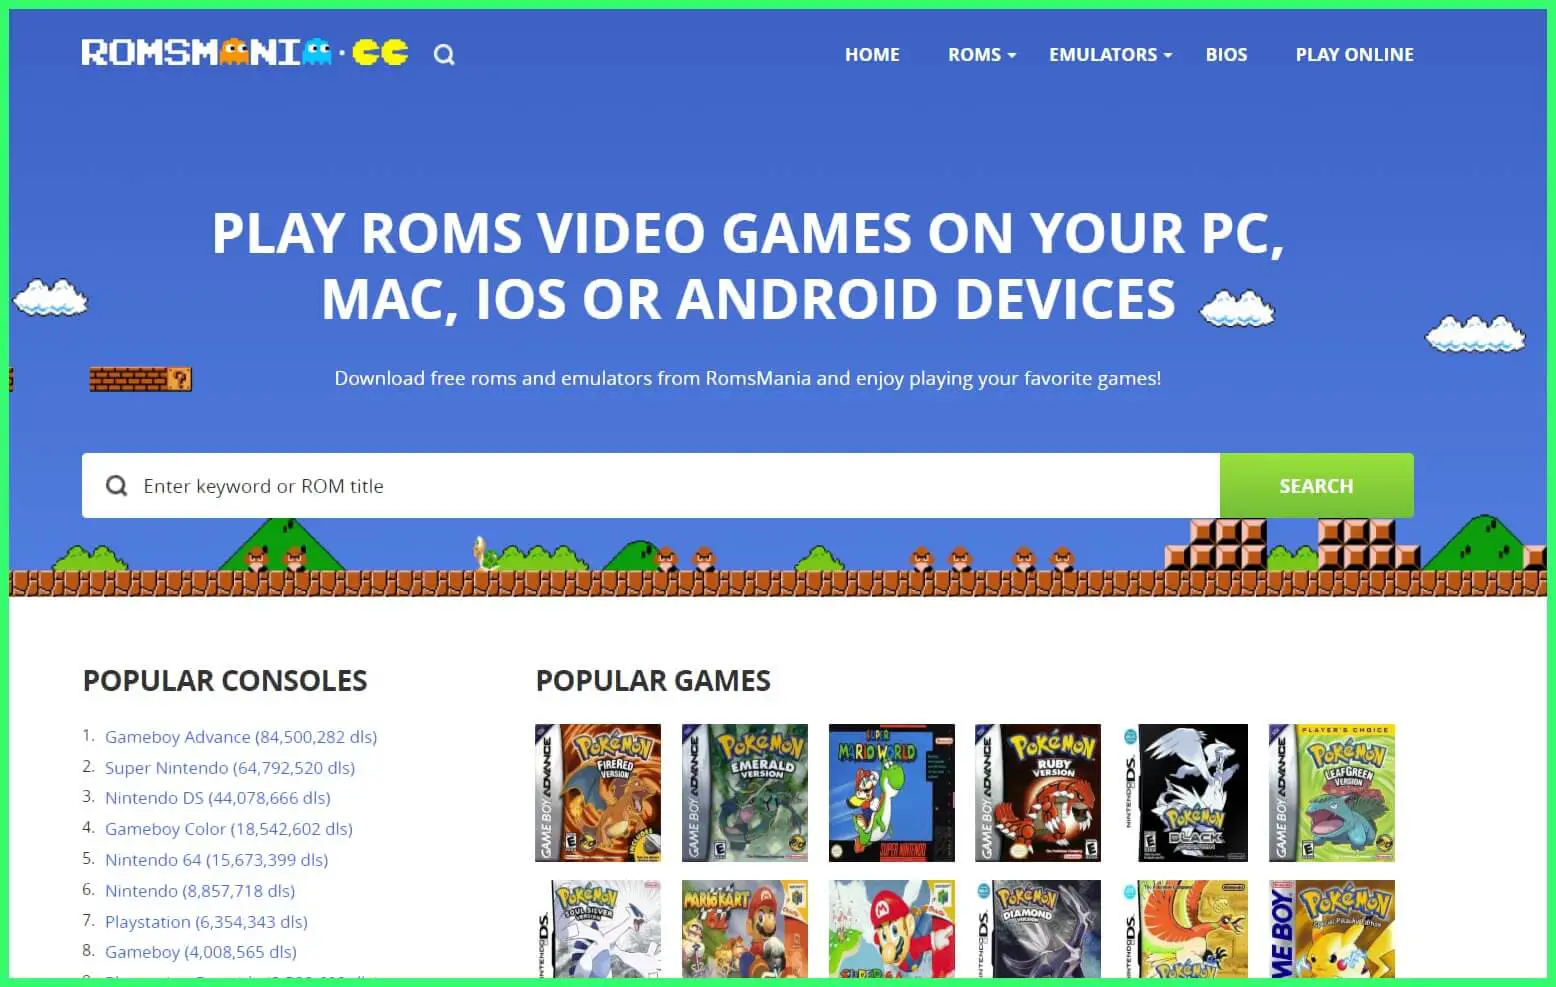 Find Legitimate and Safe Rom Sites For Classic Games